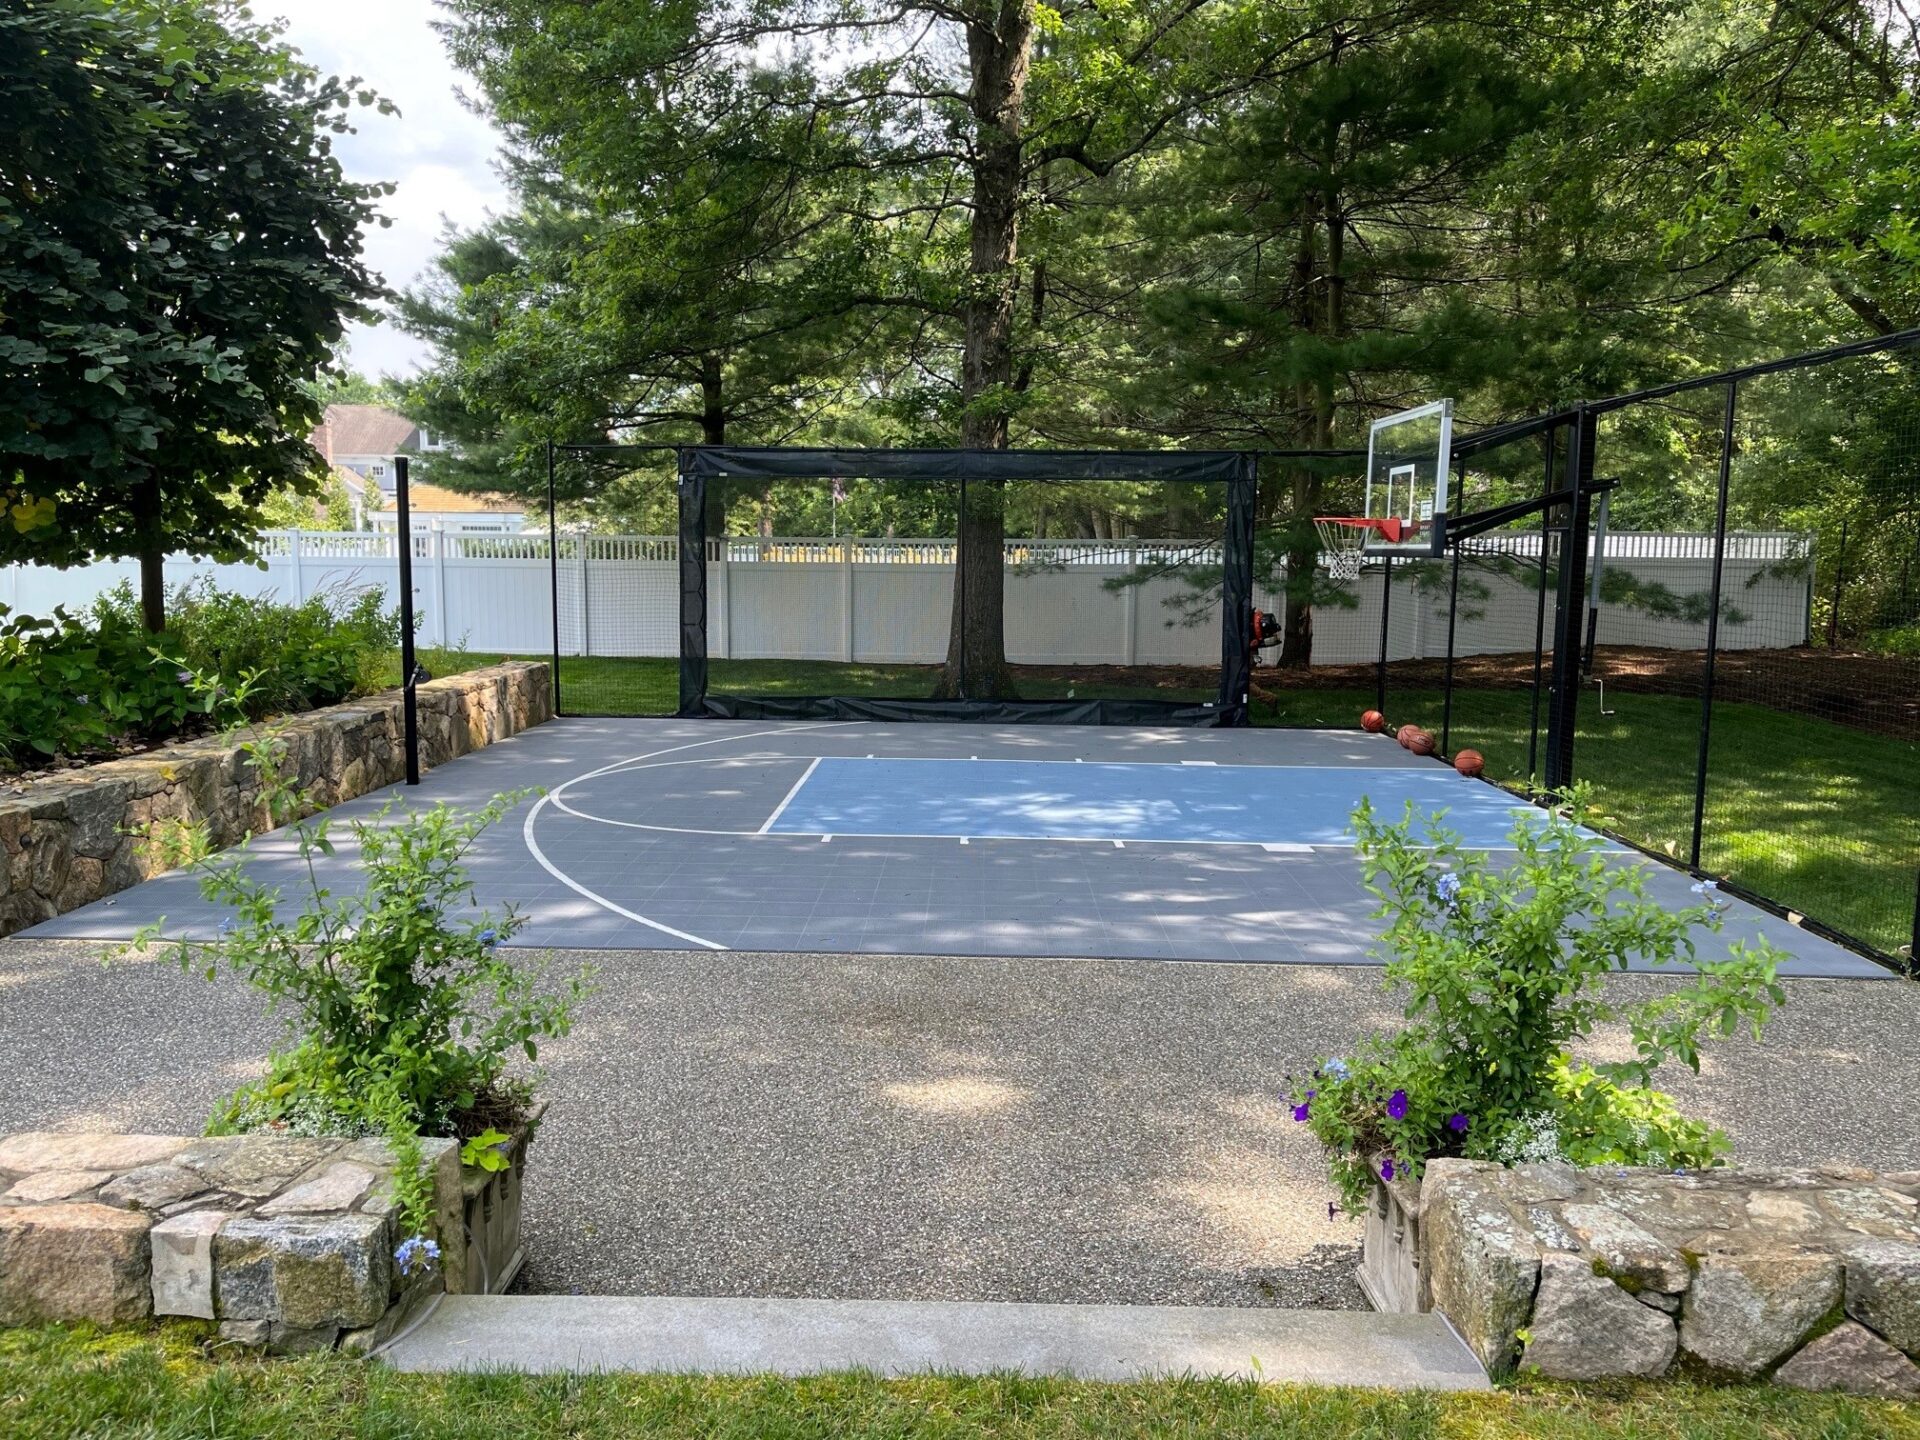 This image shows an outdoor basketball court with a fence, a basketball hoop, and several basketballs. There's greenery and a clear sky overhead.